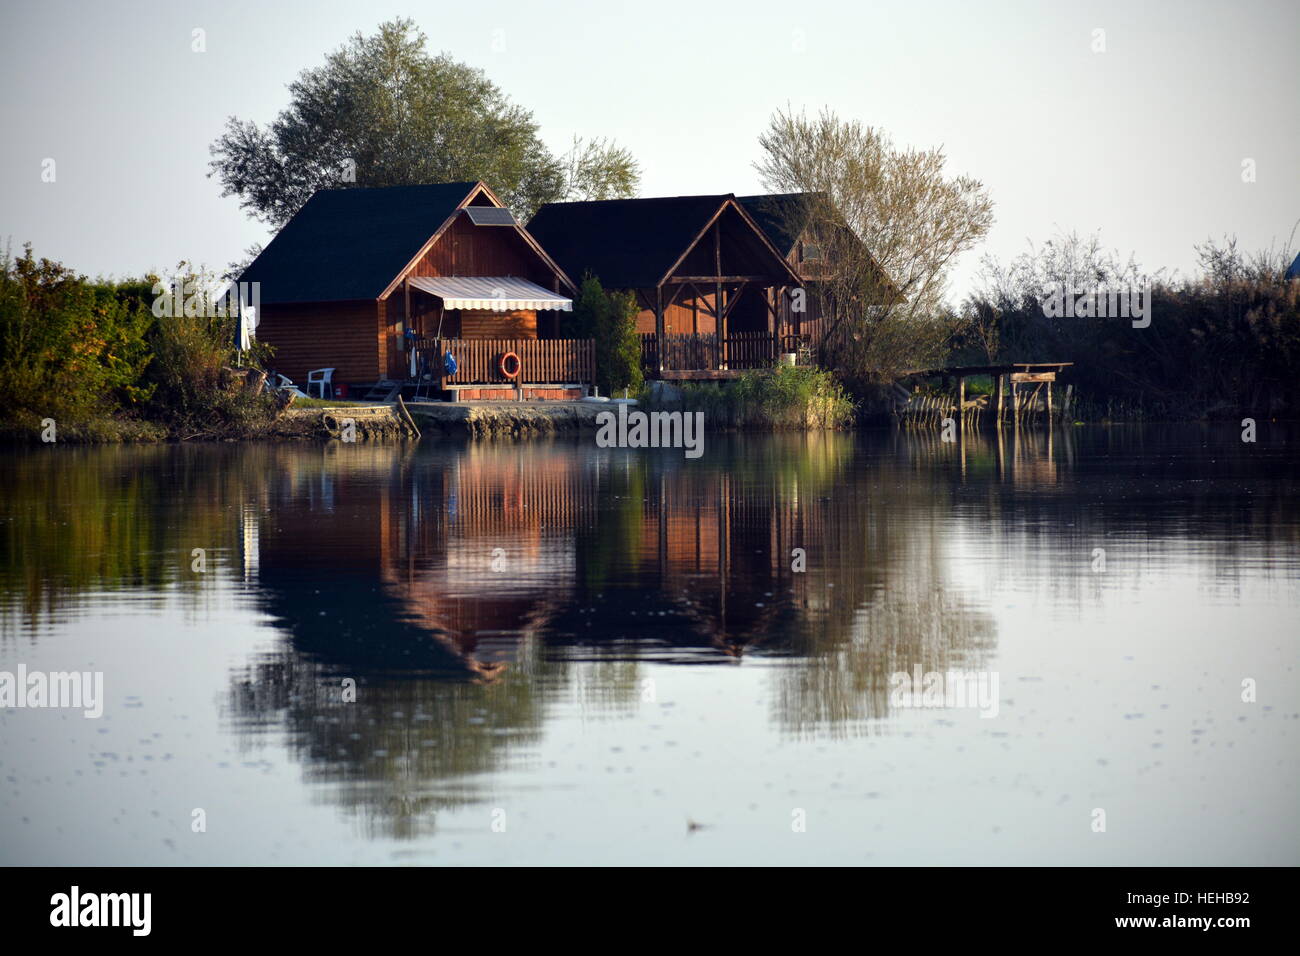 River houses mirroring in the Drava river. River stillness makes beautiful reflections. Stock Photo